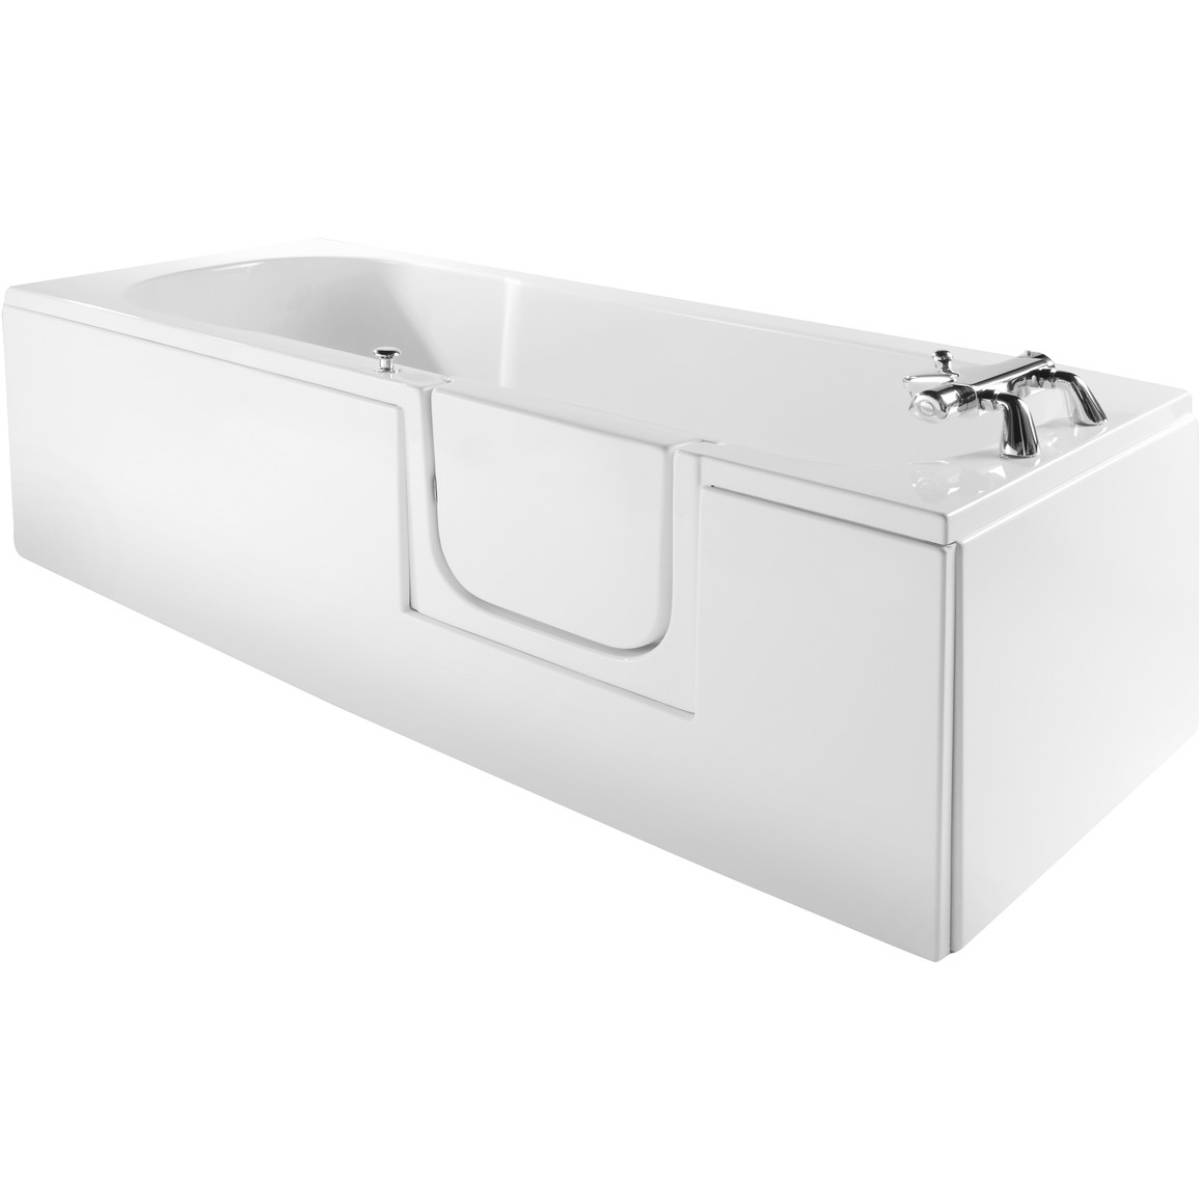 Moods Bathrooms to Love Easy Access 1690 x 690mm Walk-In Single Ended Bath - Right Hand (979)